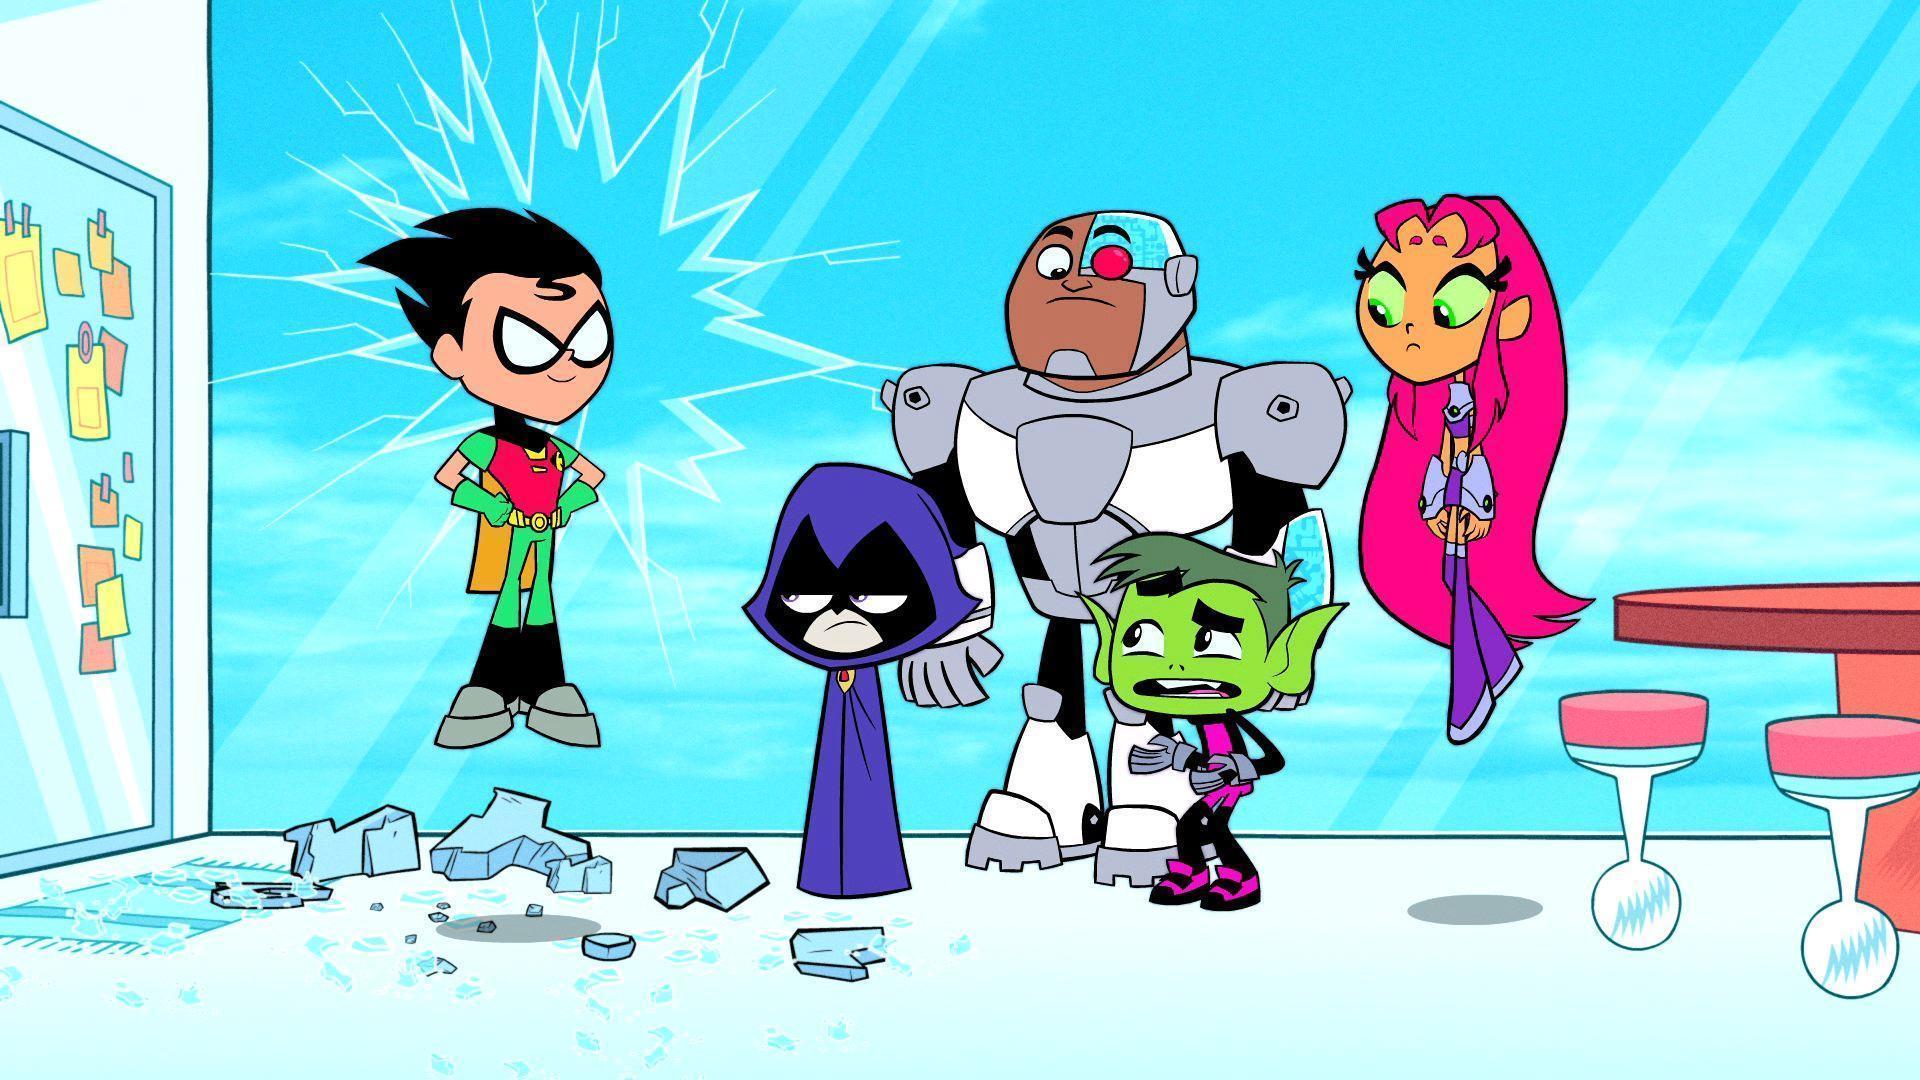 New Episode of Teen Titans Go! “Super Robin” Airs July 2